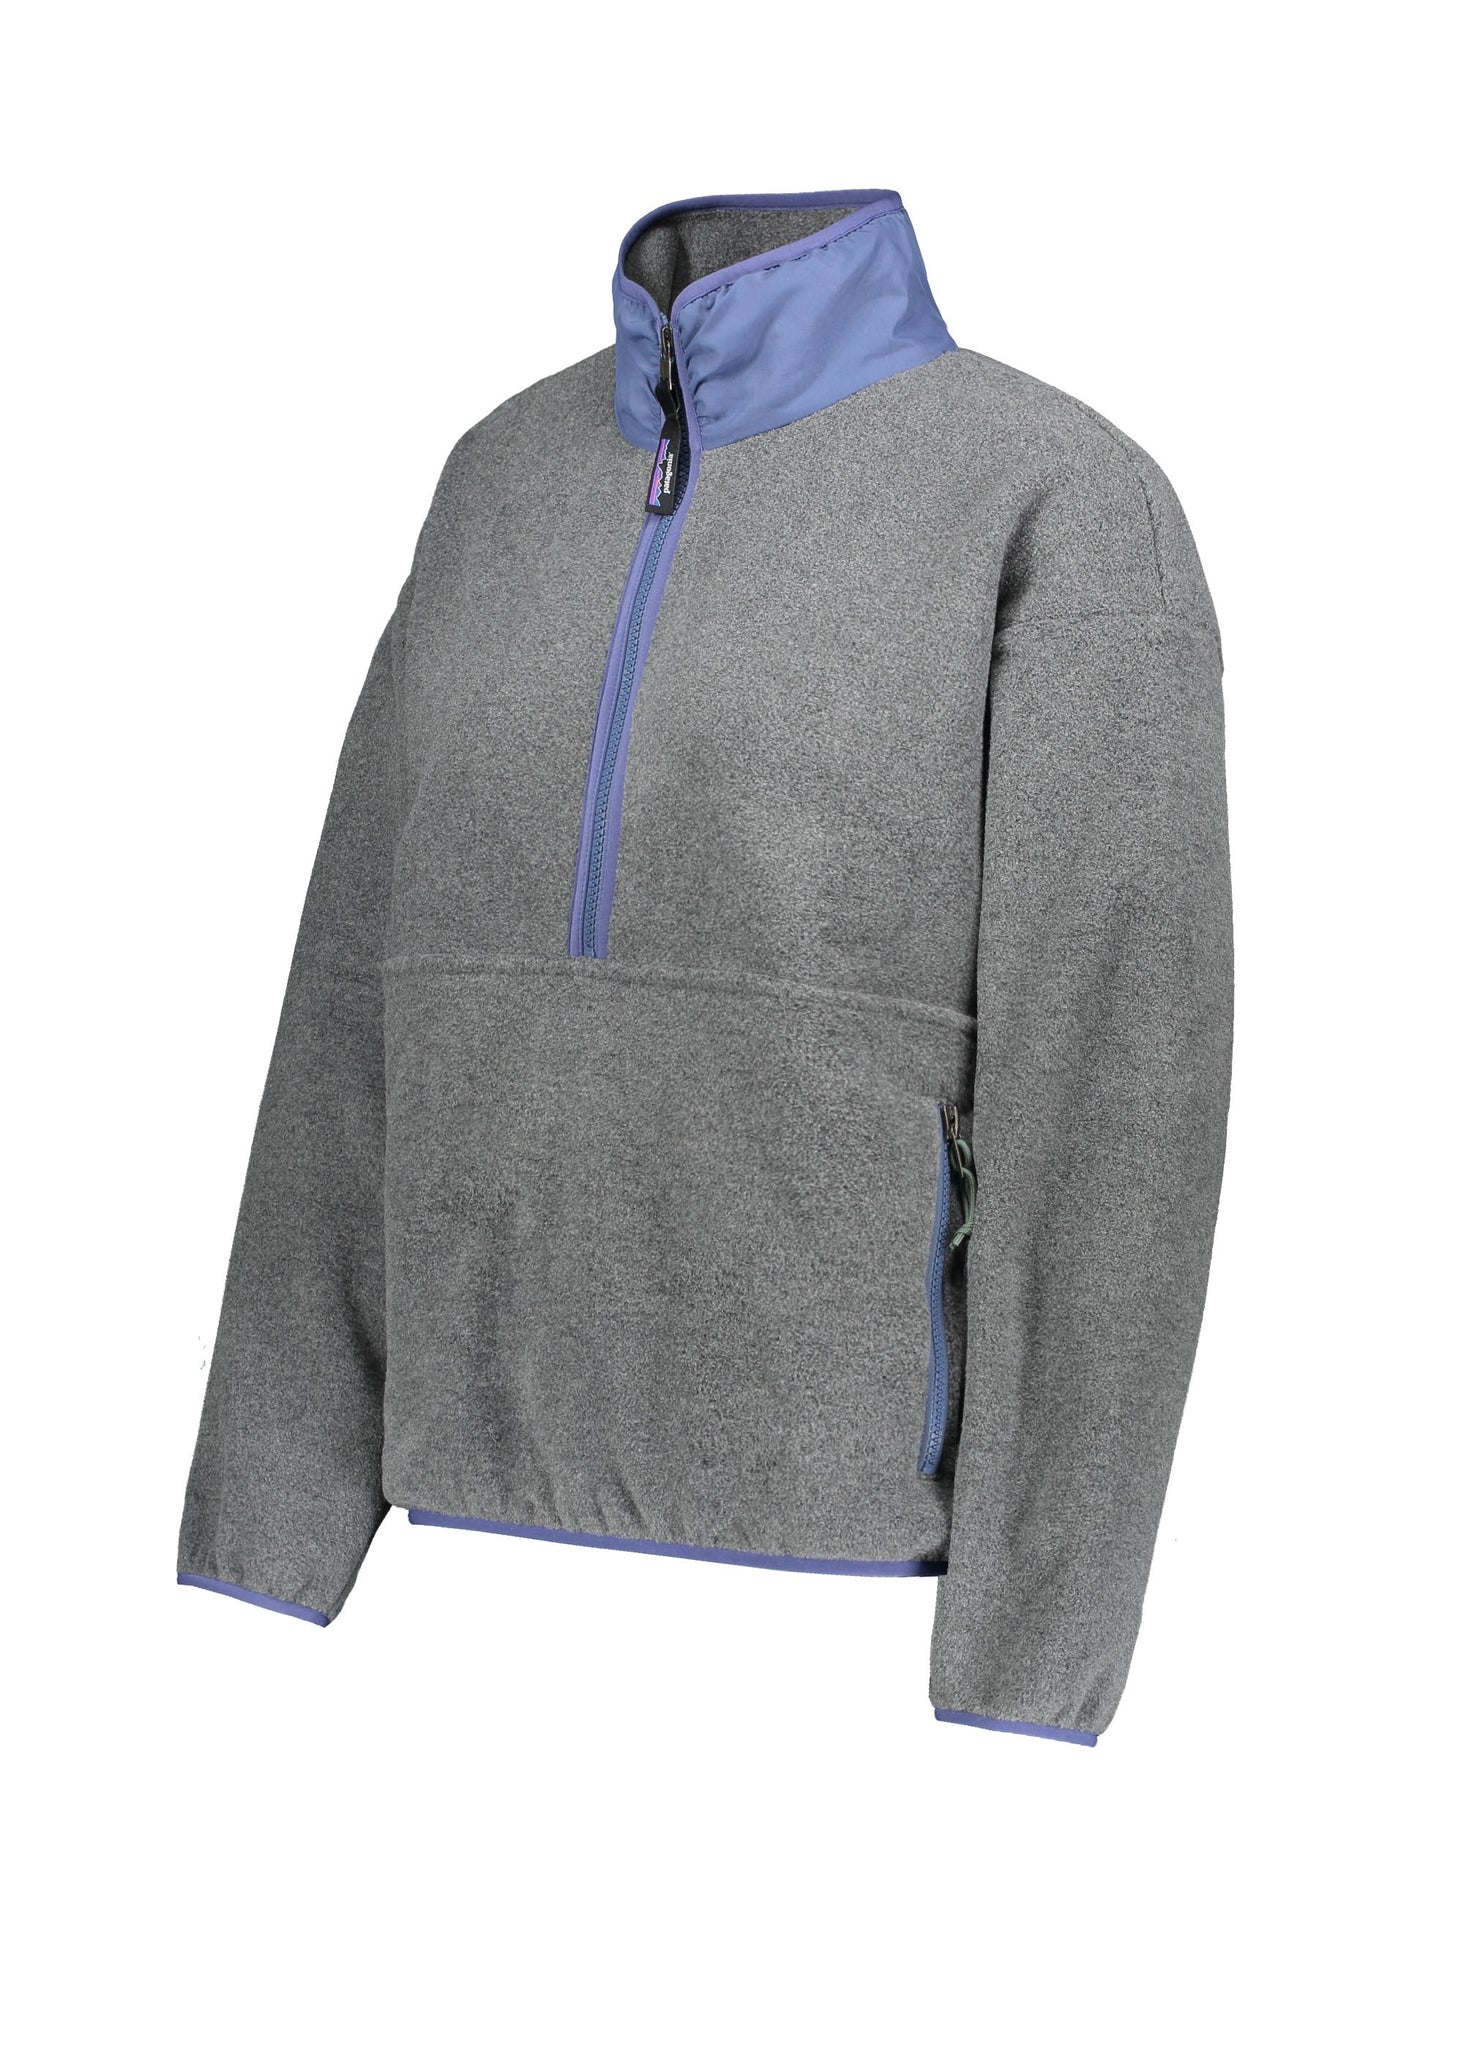 Patagonia Synch Sweat - Nickel